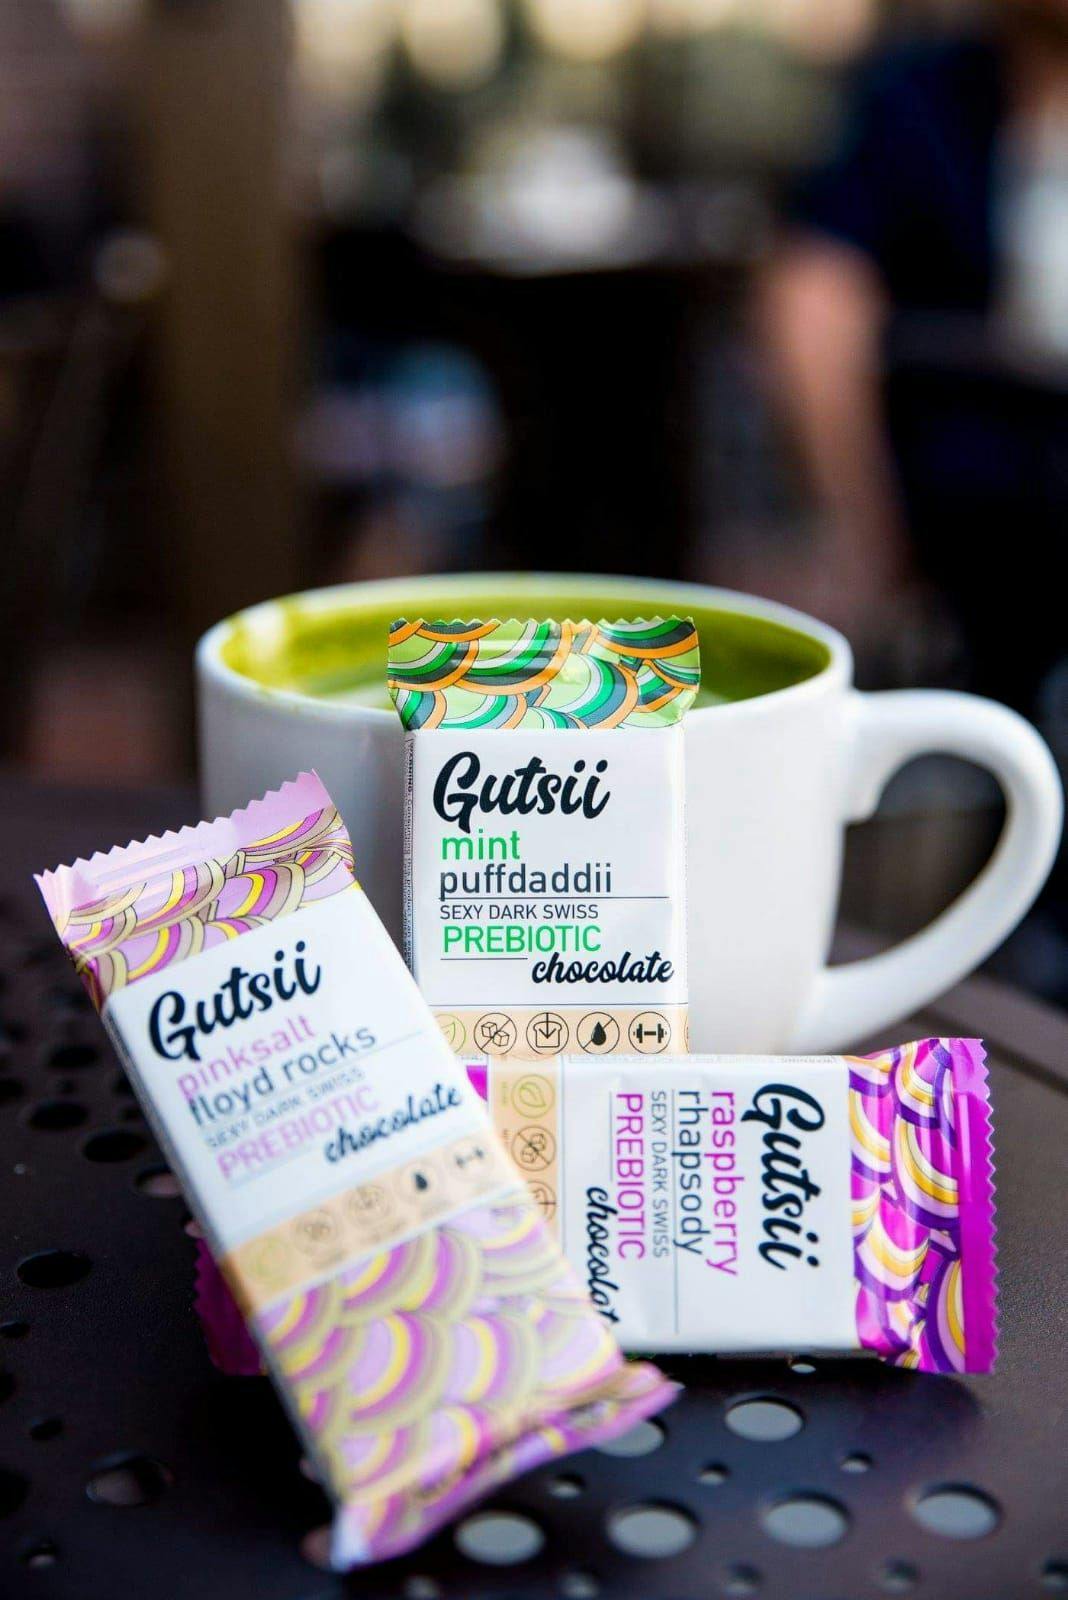 Gut Eats: Probiotic and prebiotic food and drink launches